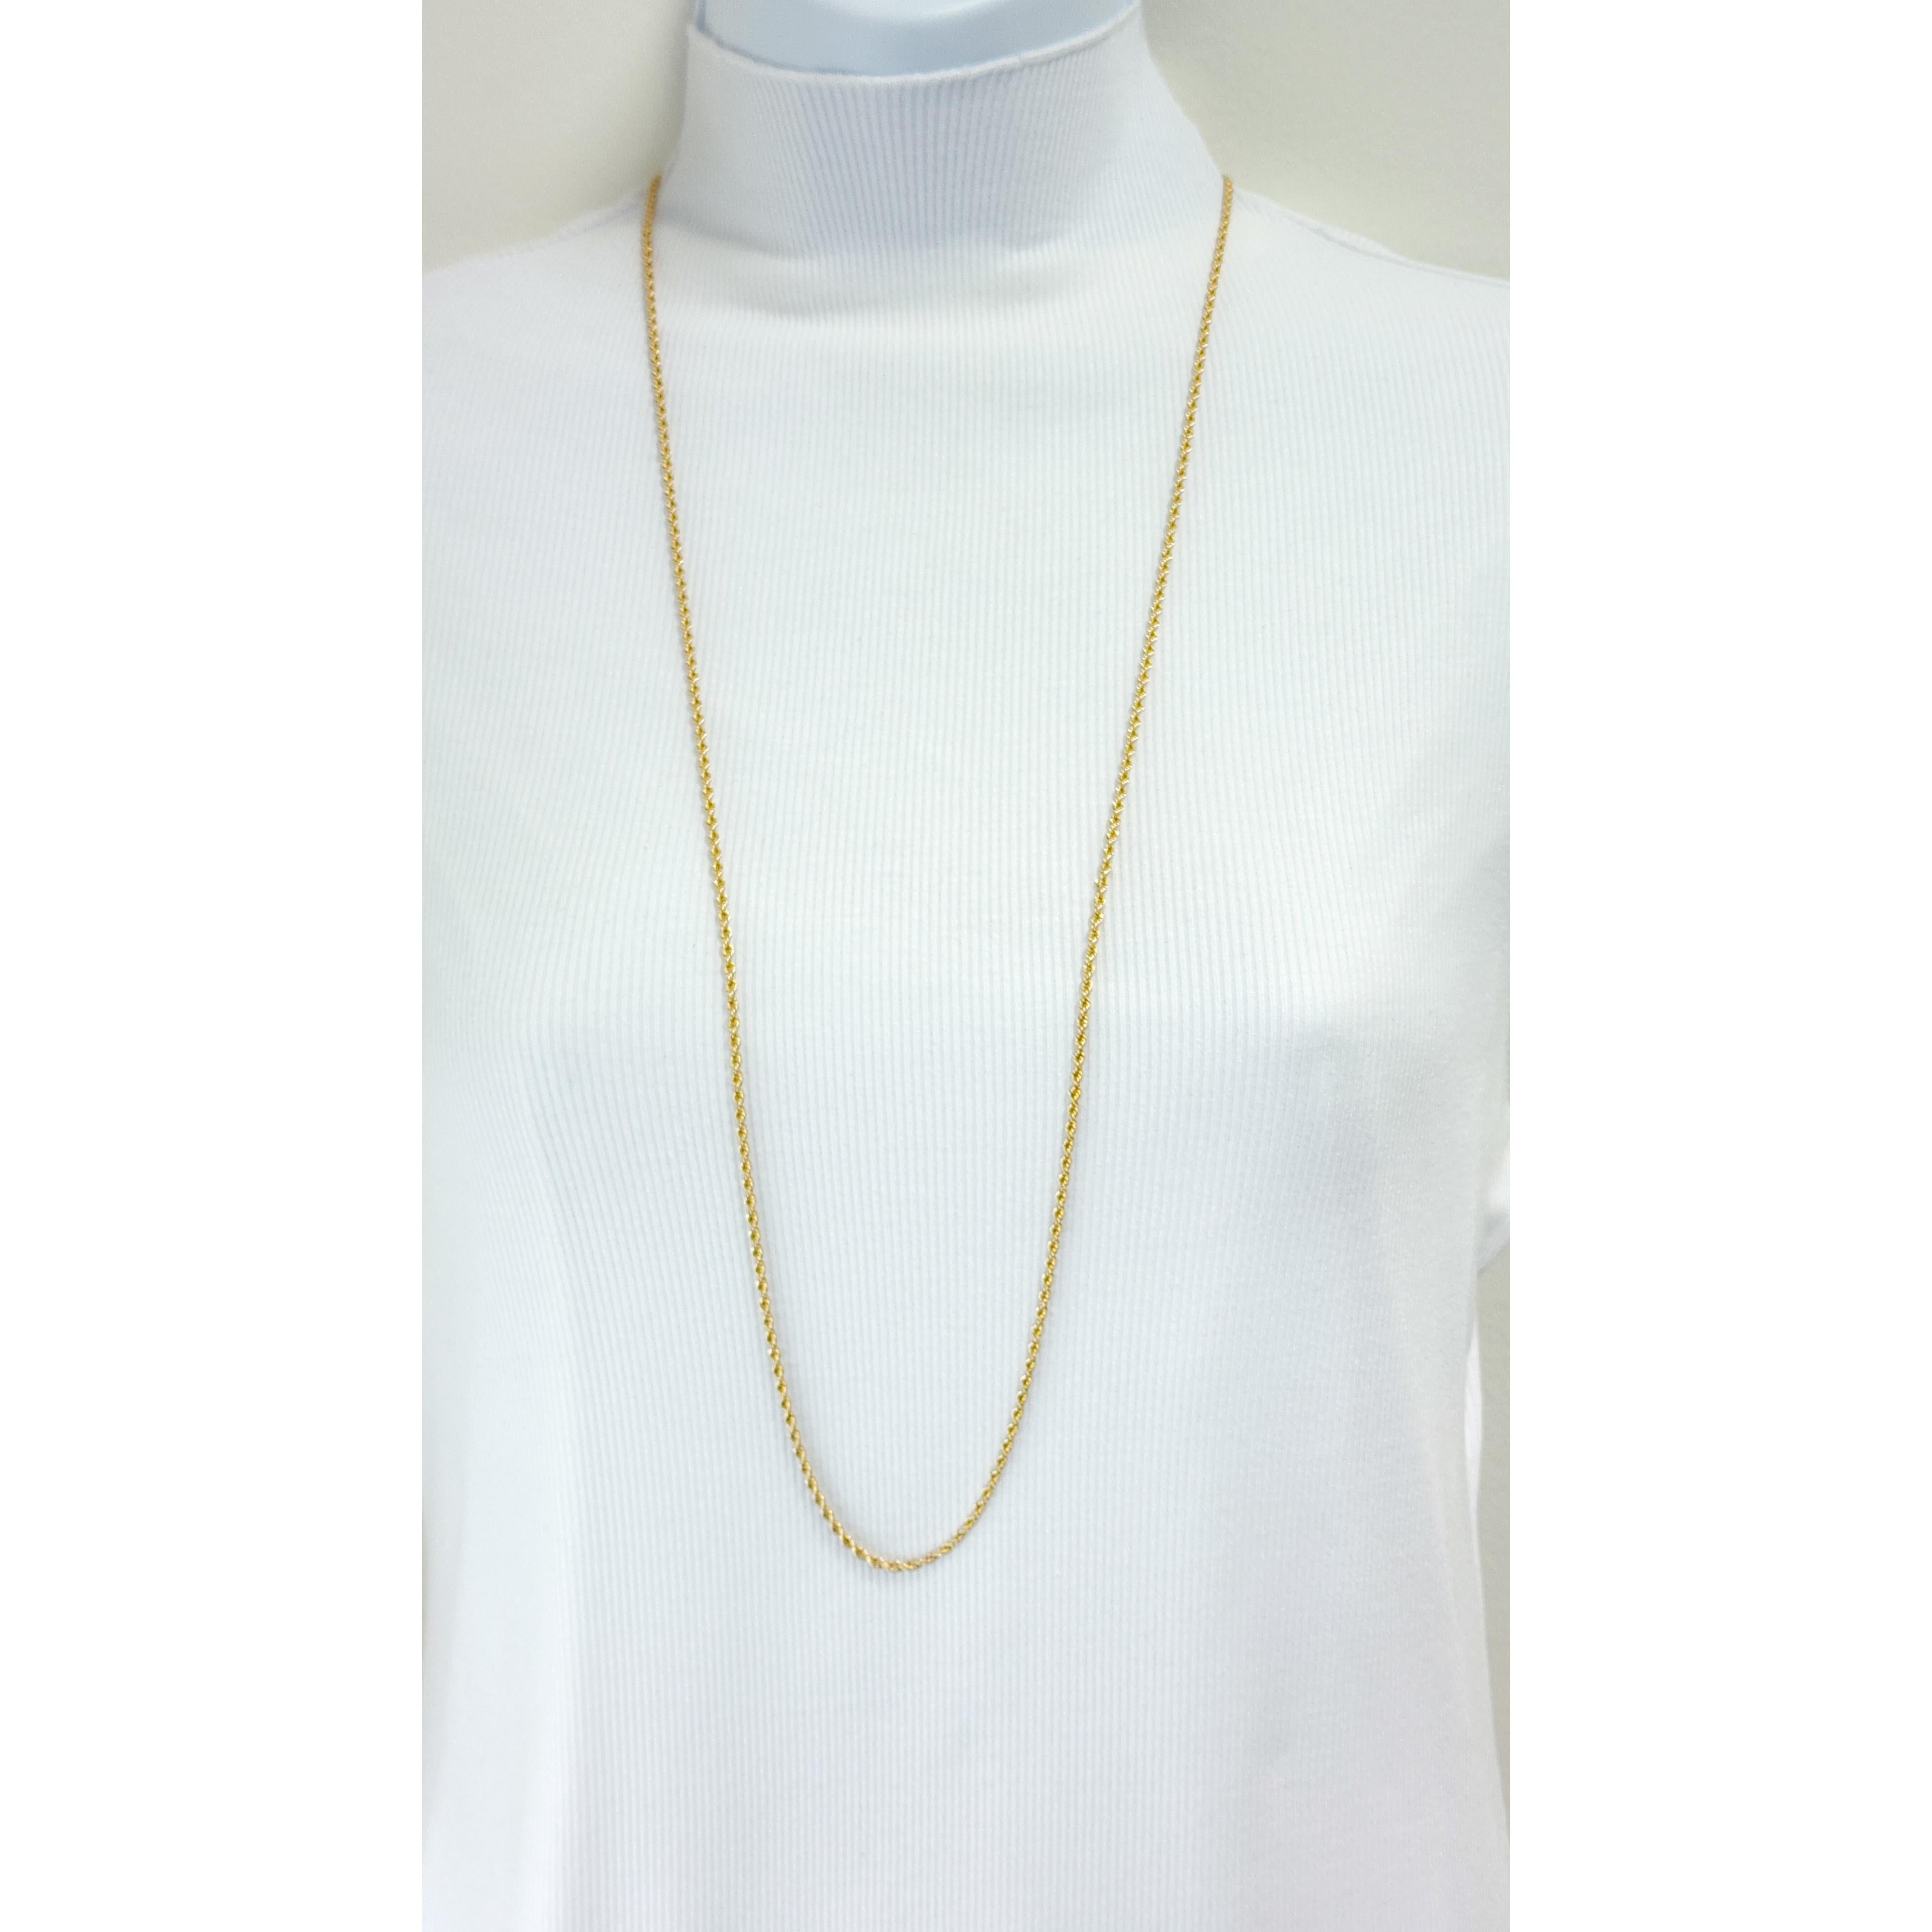 Women's or Men's Italian 18k Yellow Gold Rope Chain For Sale